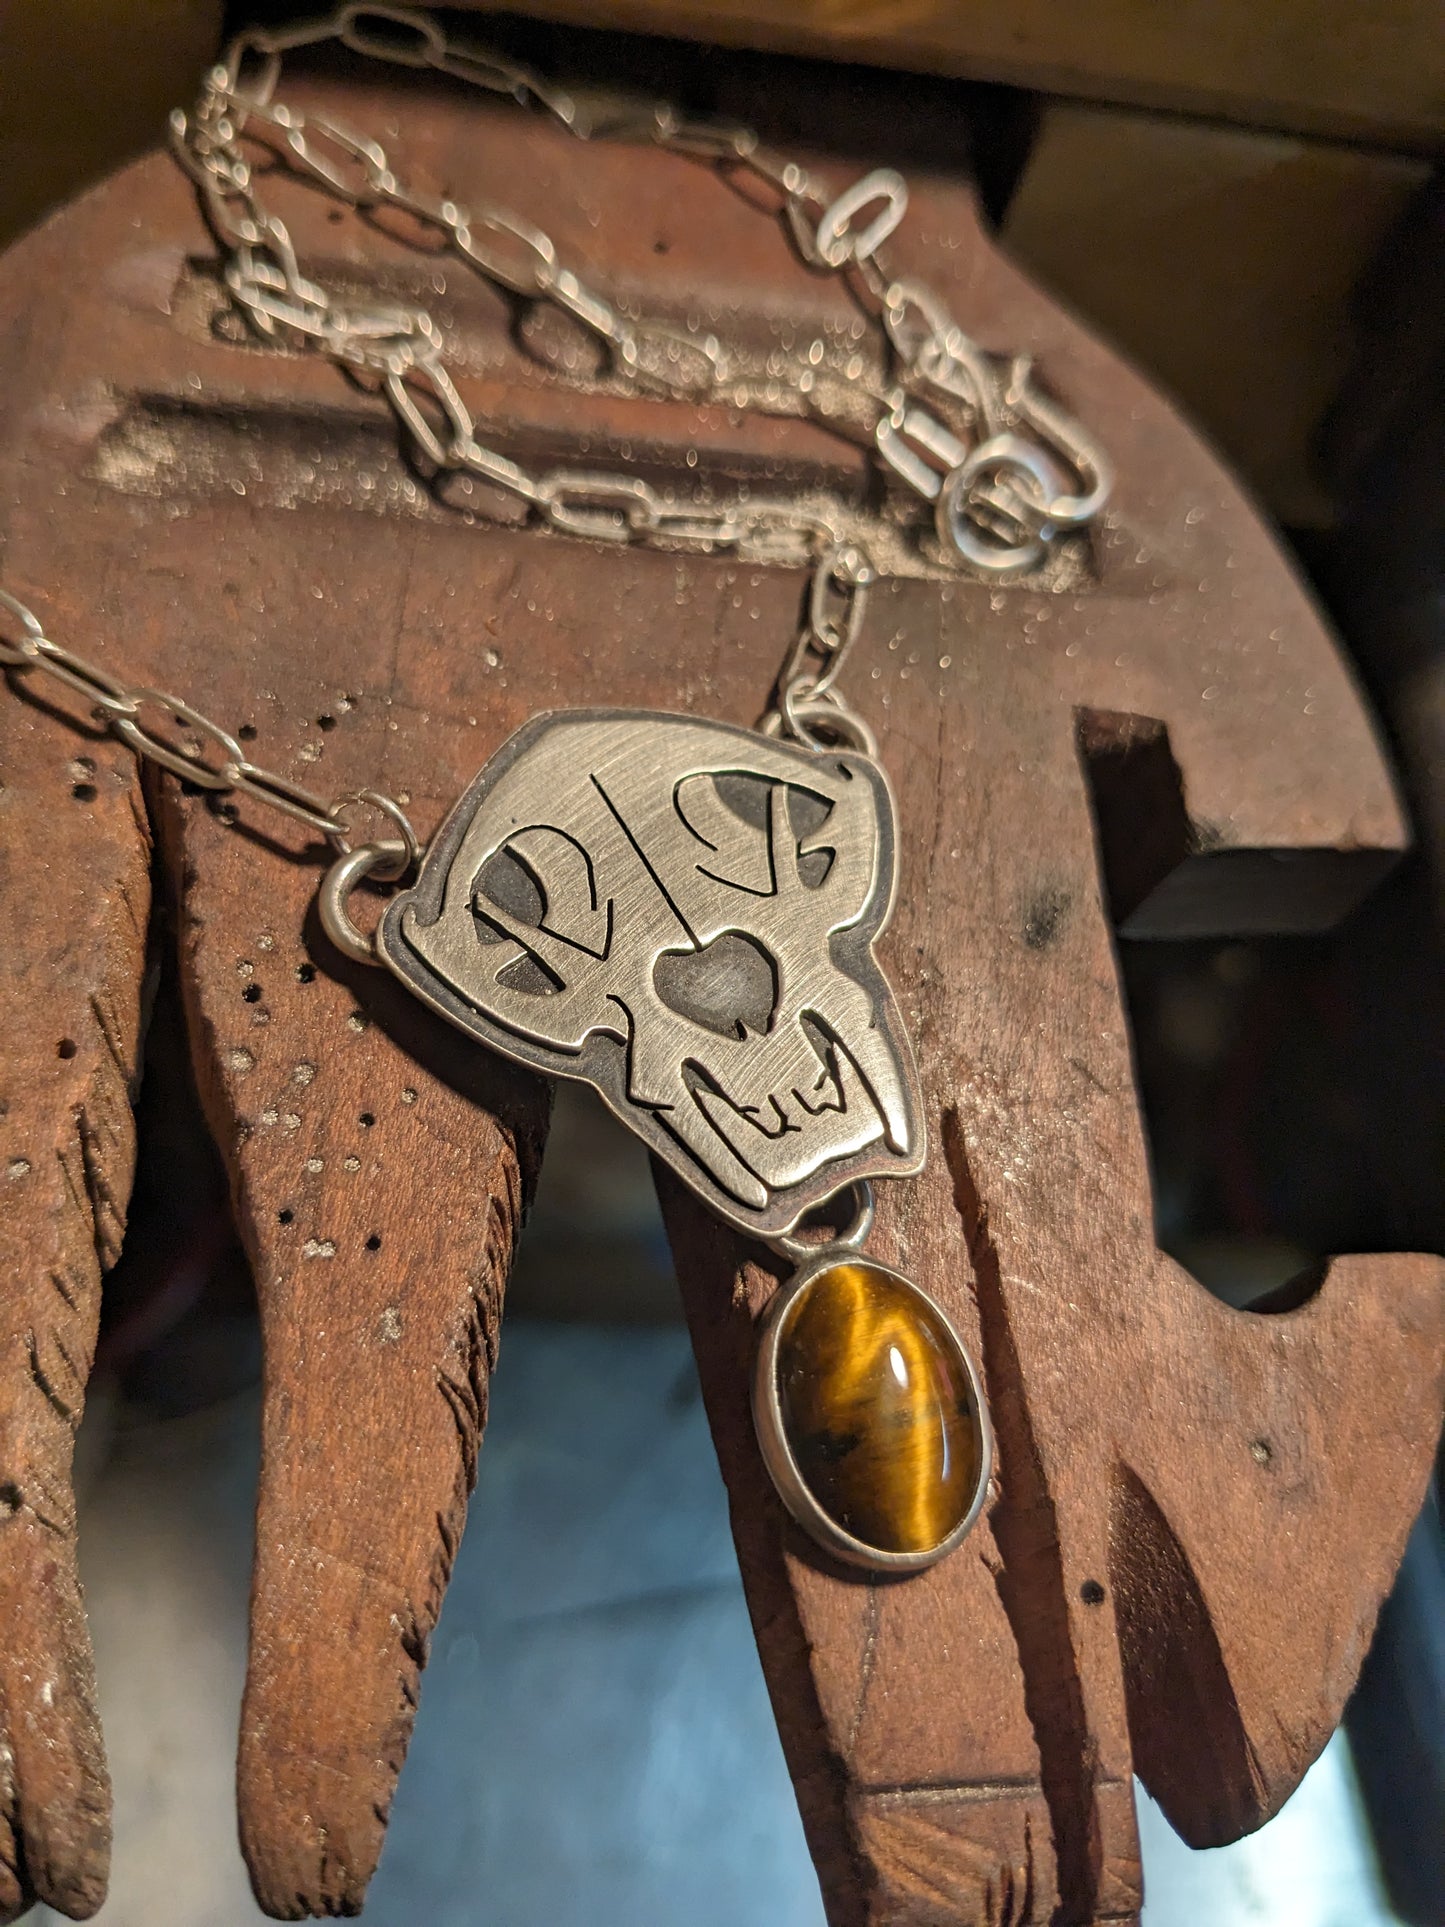 Panther skull and tigers eye